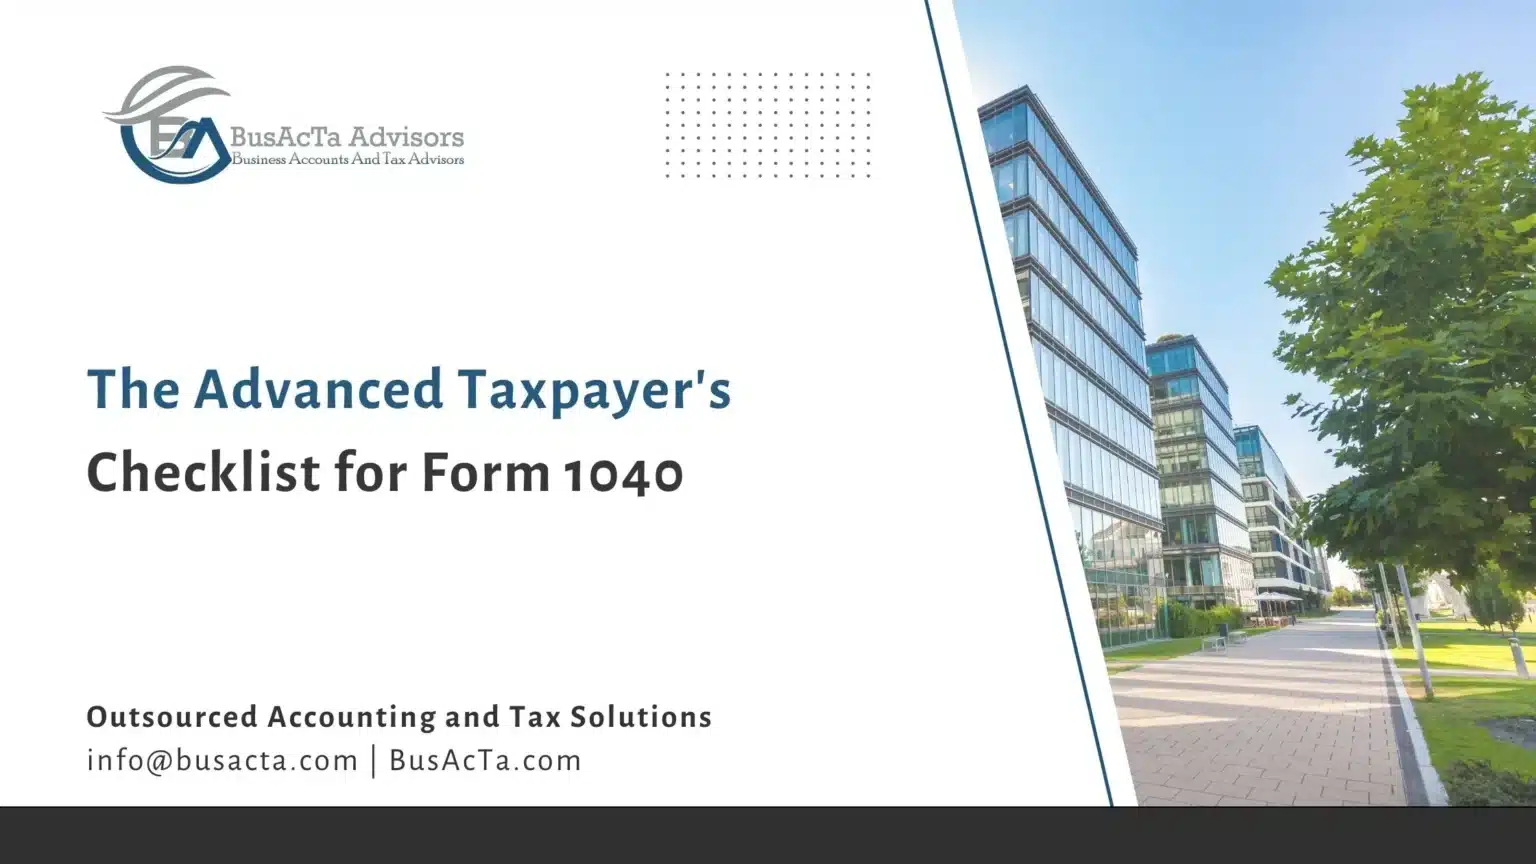 Checklist for Form 1040